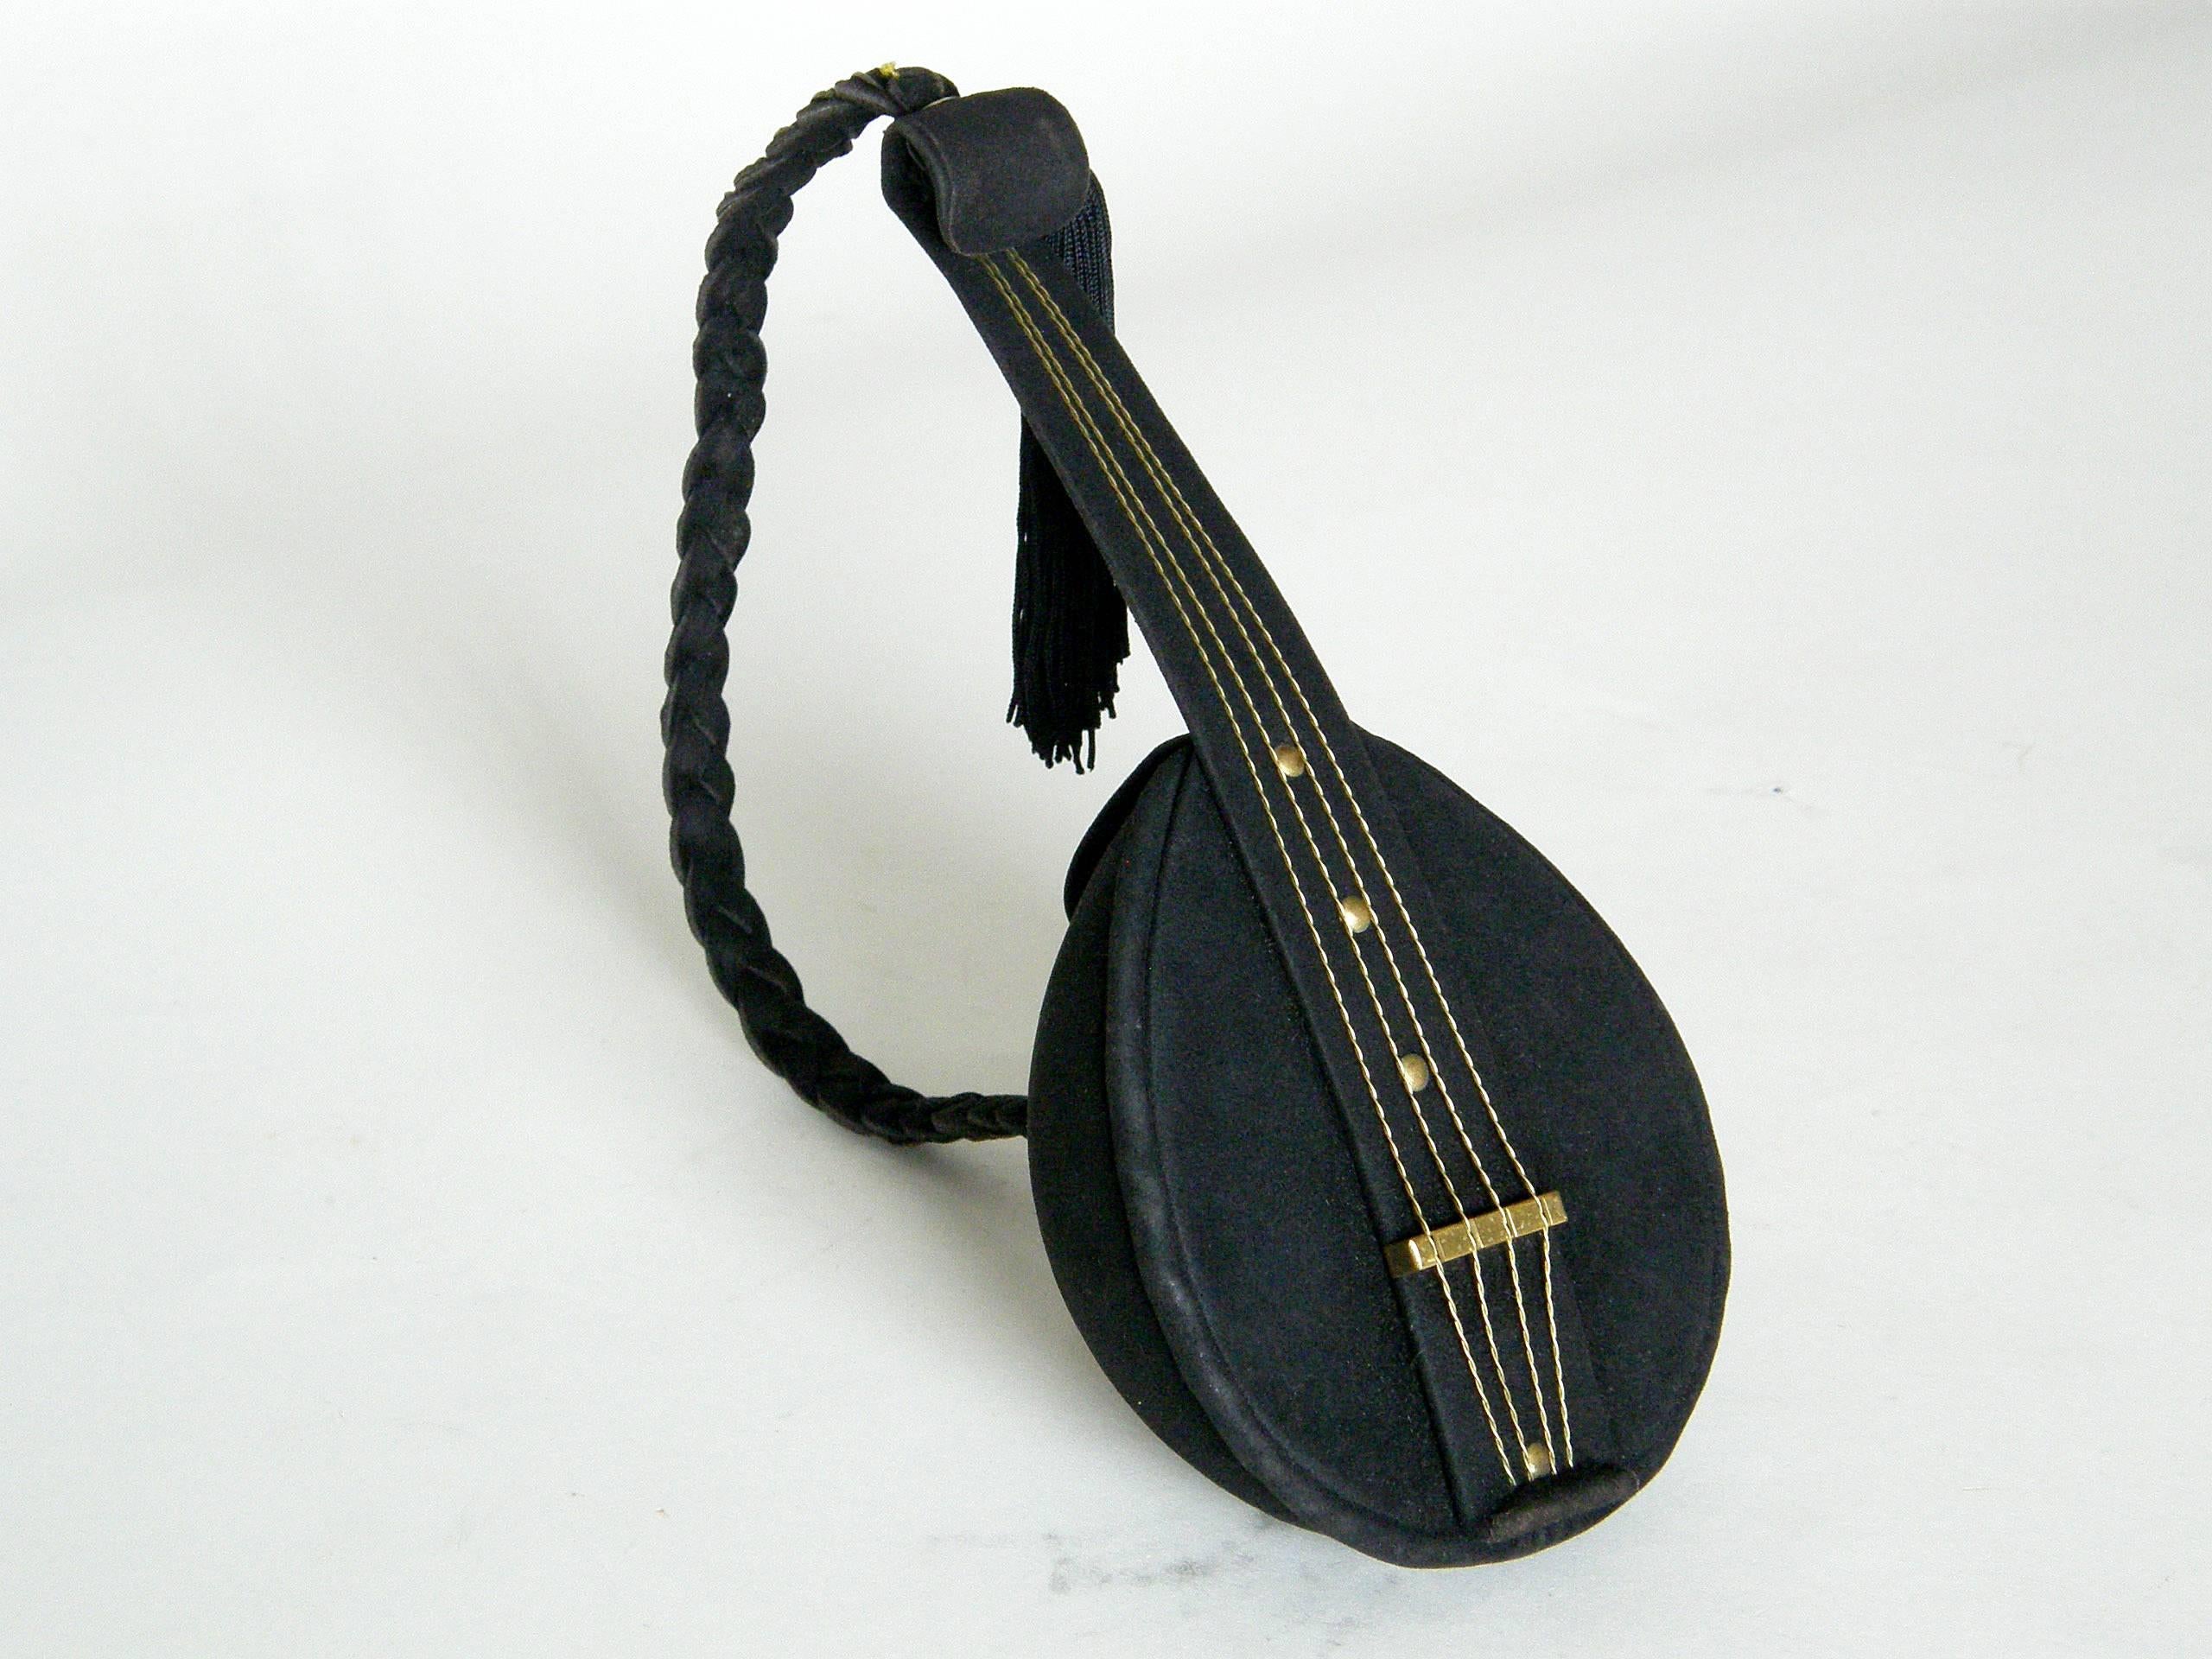 This delightful figural handbag is shaped like a mandolin. It's covered in a fine, black suede with details and accents in gold plated brass. The “strings” are twisted wires that run through notches in the “bridge”. The neck bends slightly and